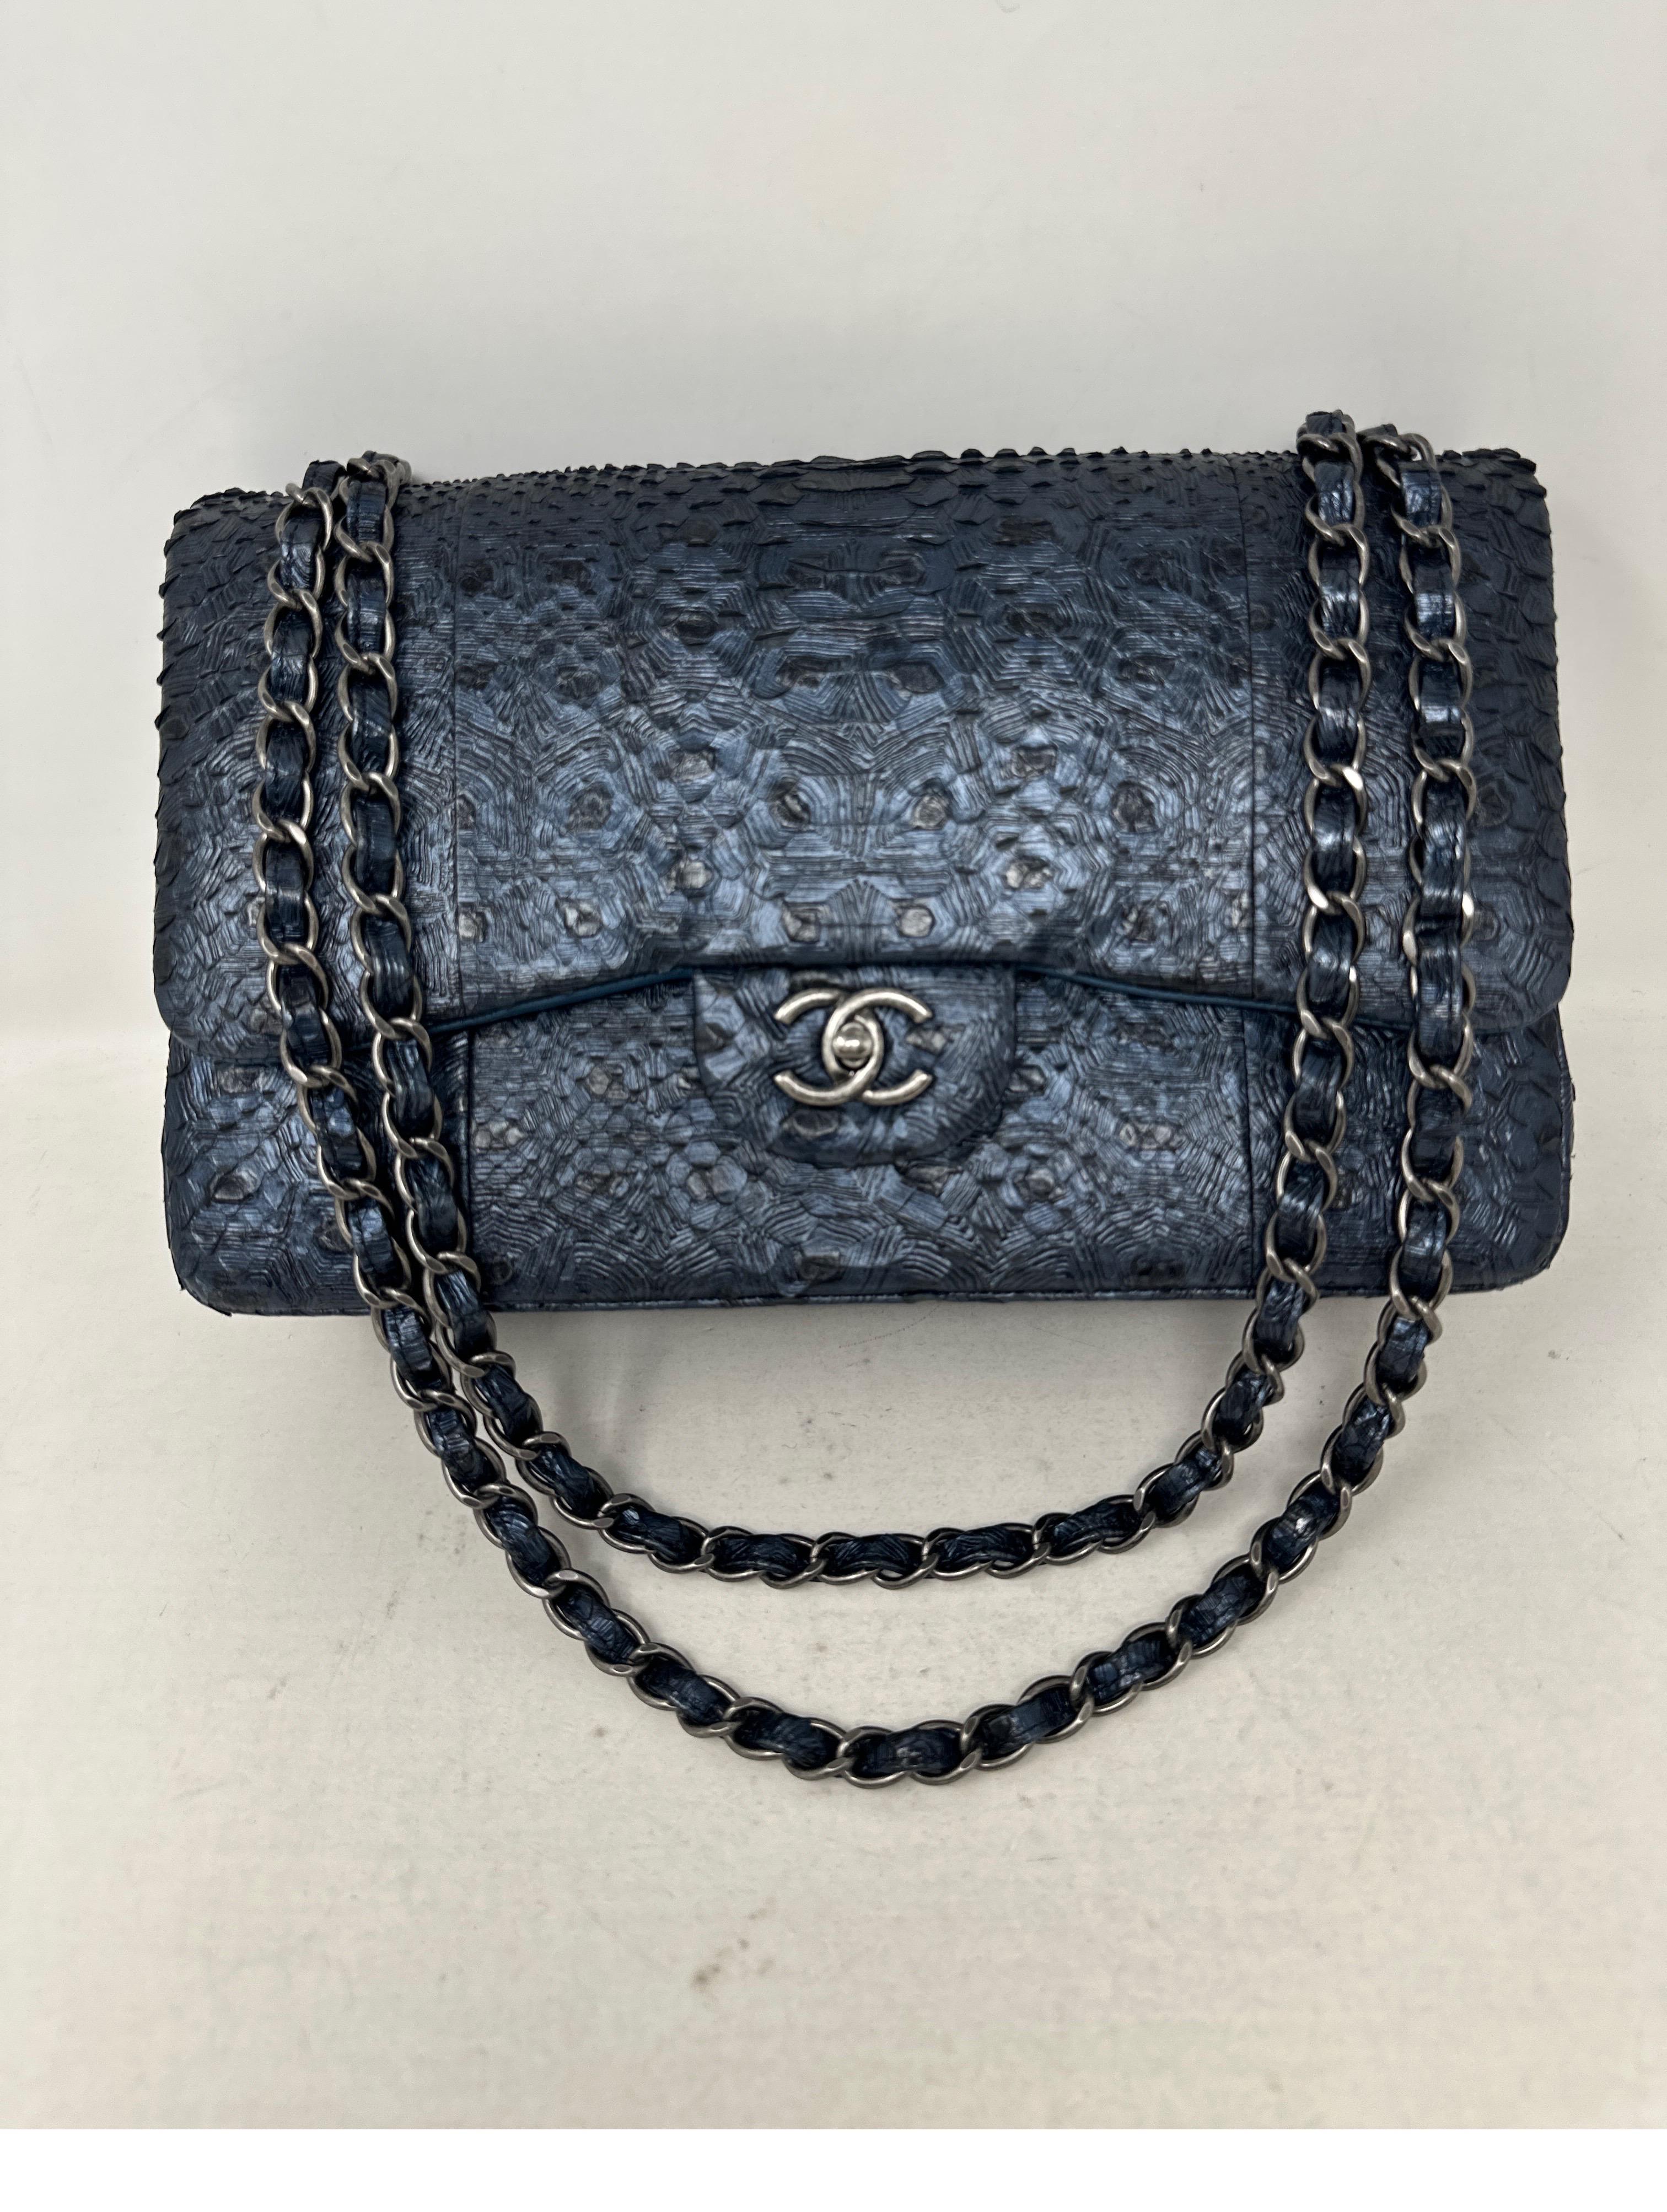 Chanel Exotic Python Jumbo Double Flap Bag. Extremely rare exotic skin leather bag. Chanel has retired exotics. Great investment bag. Value has gone way up due to rarity and Chanel keeps going up. Immaculate condition. Bag was never used. Full set.